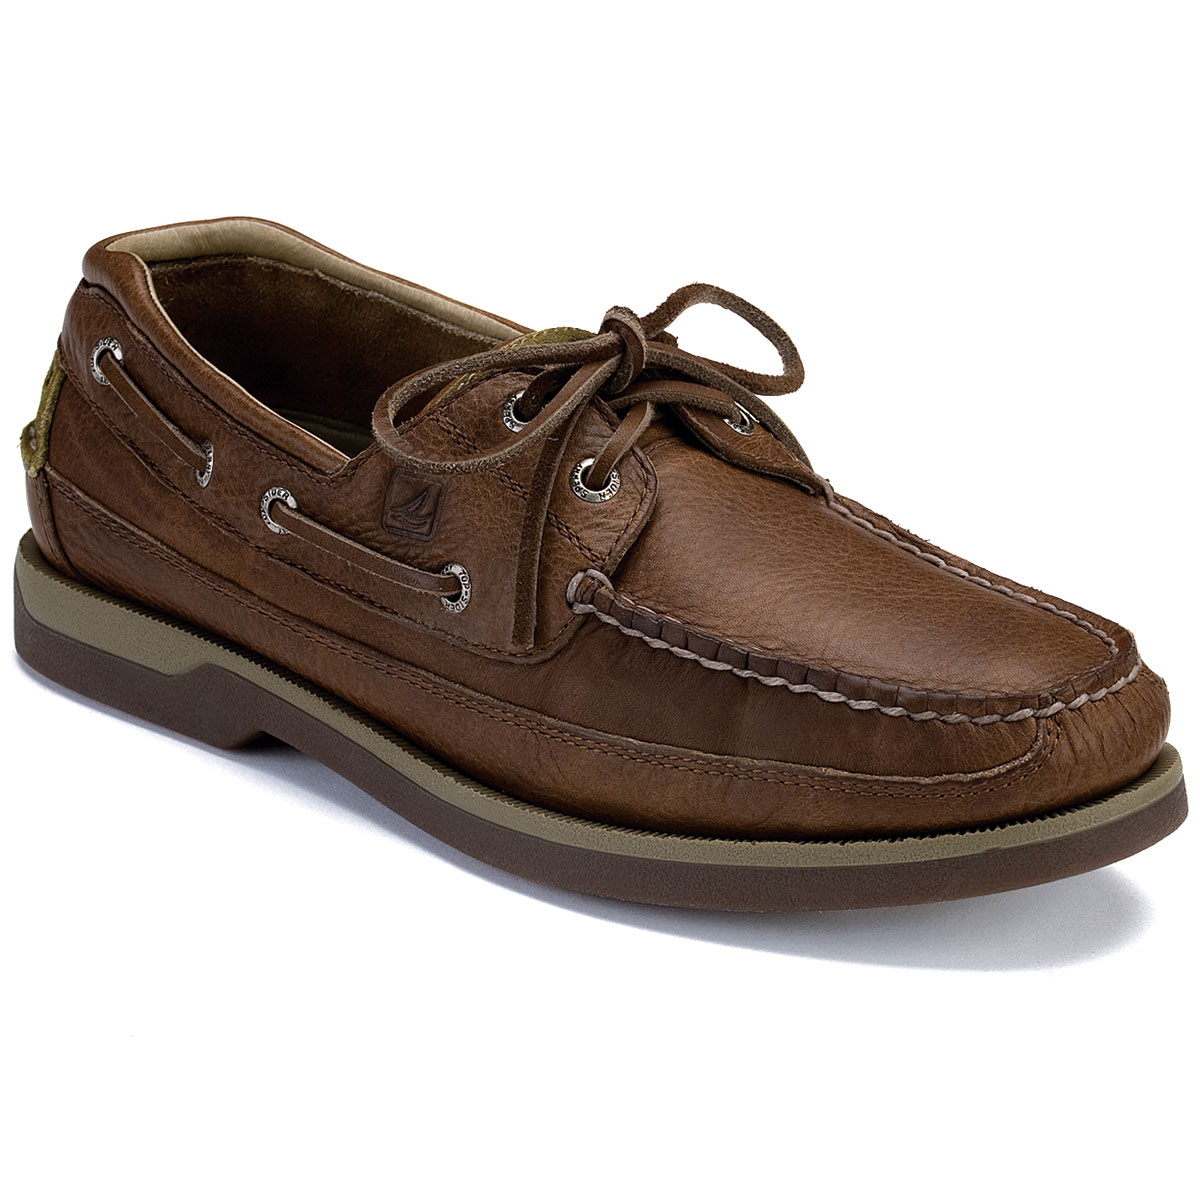 wide boat shoes